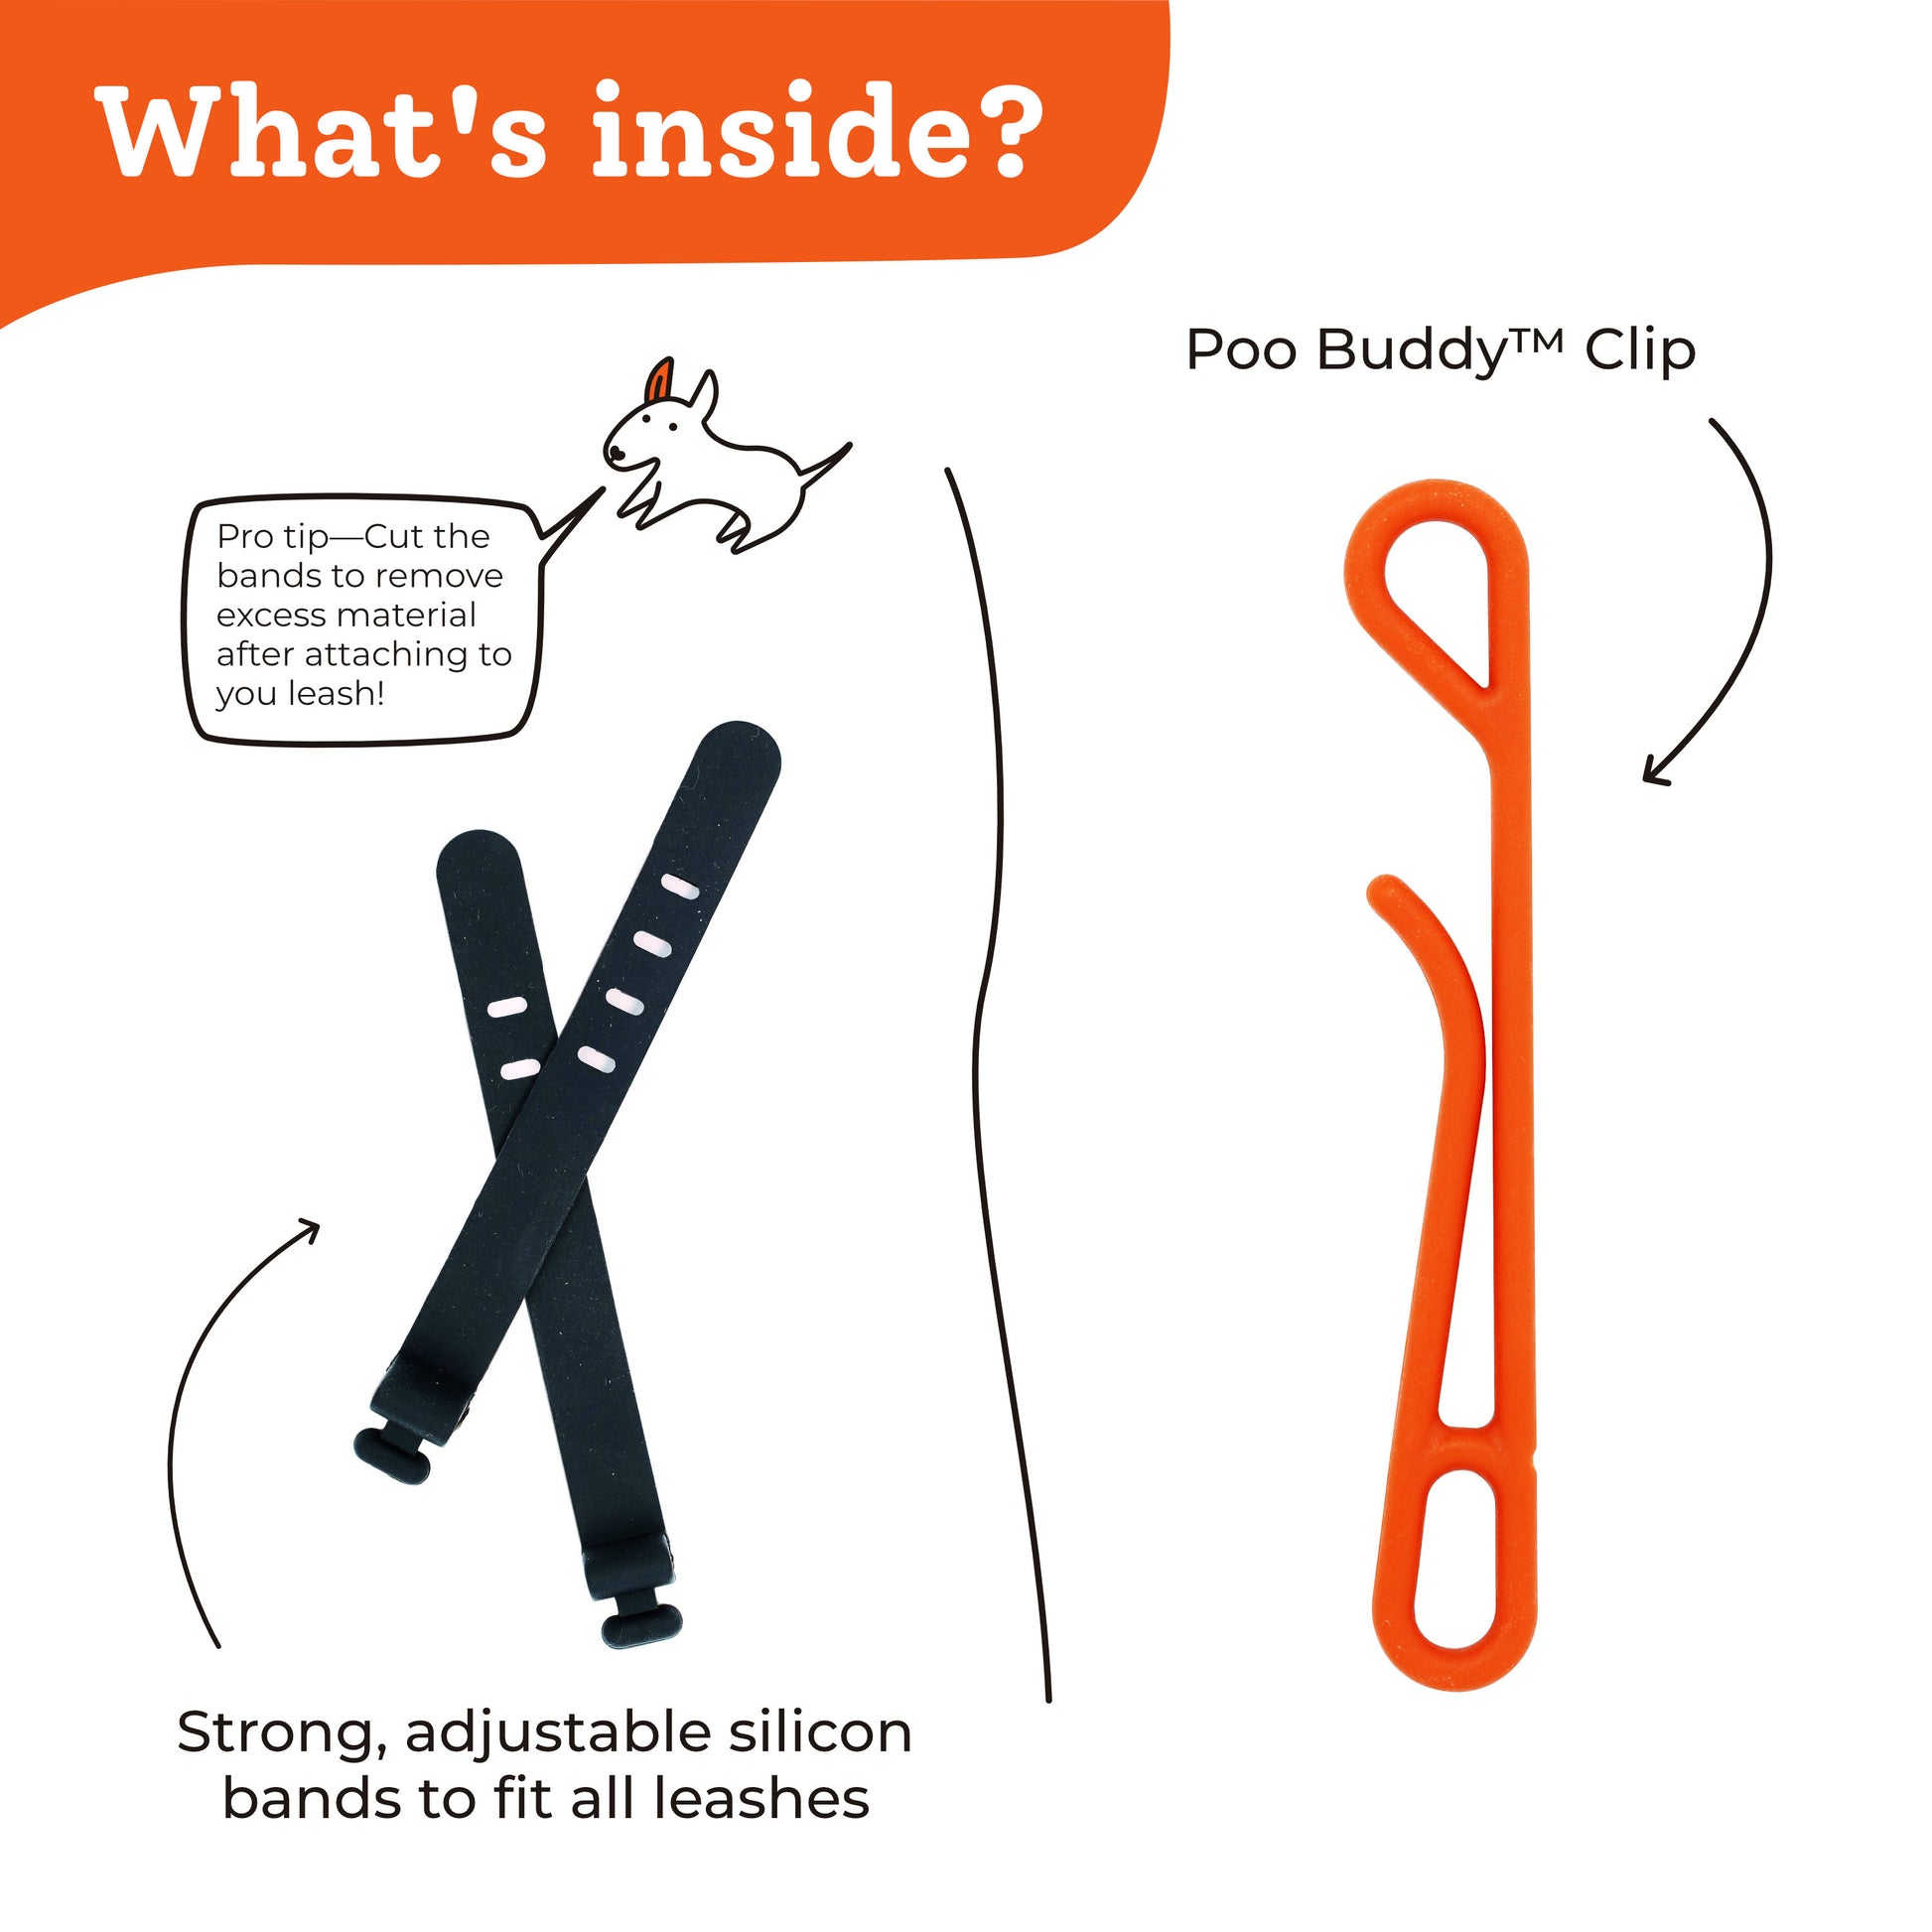 What's inside? Strong, adjustable silicon bands to fit all leashes - Poo Buddy clip - Pro tip, cut the bands to remove excess material after attaching to your leash!